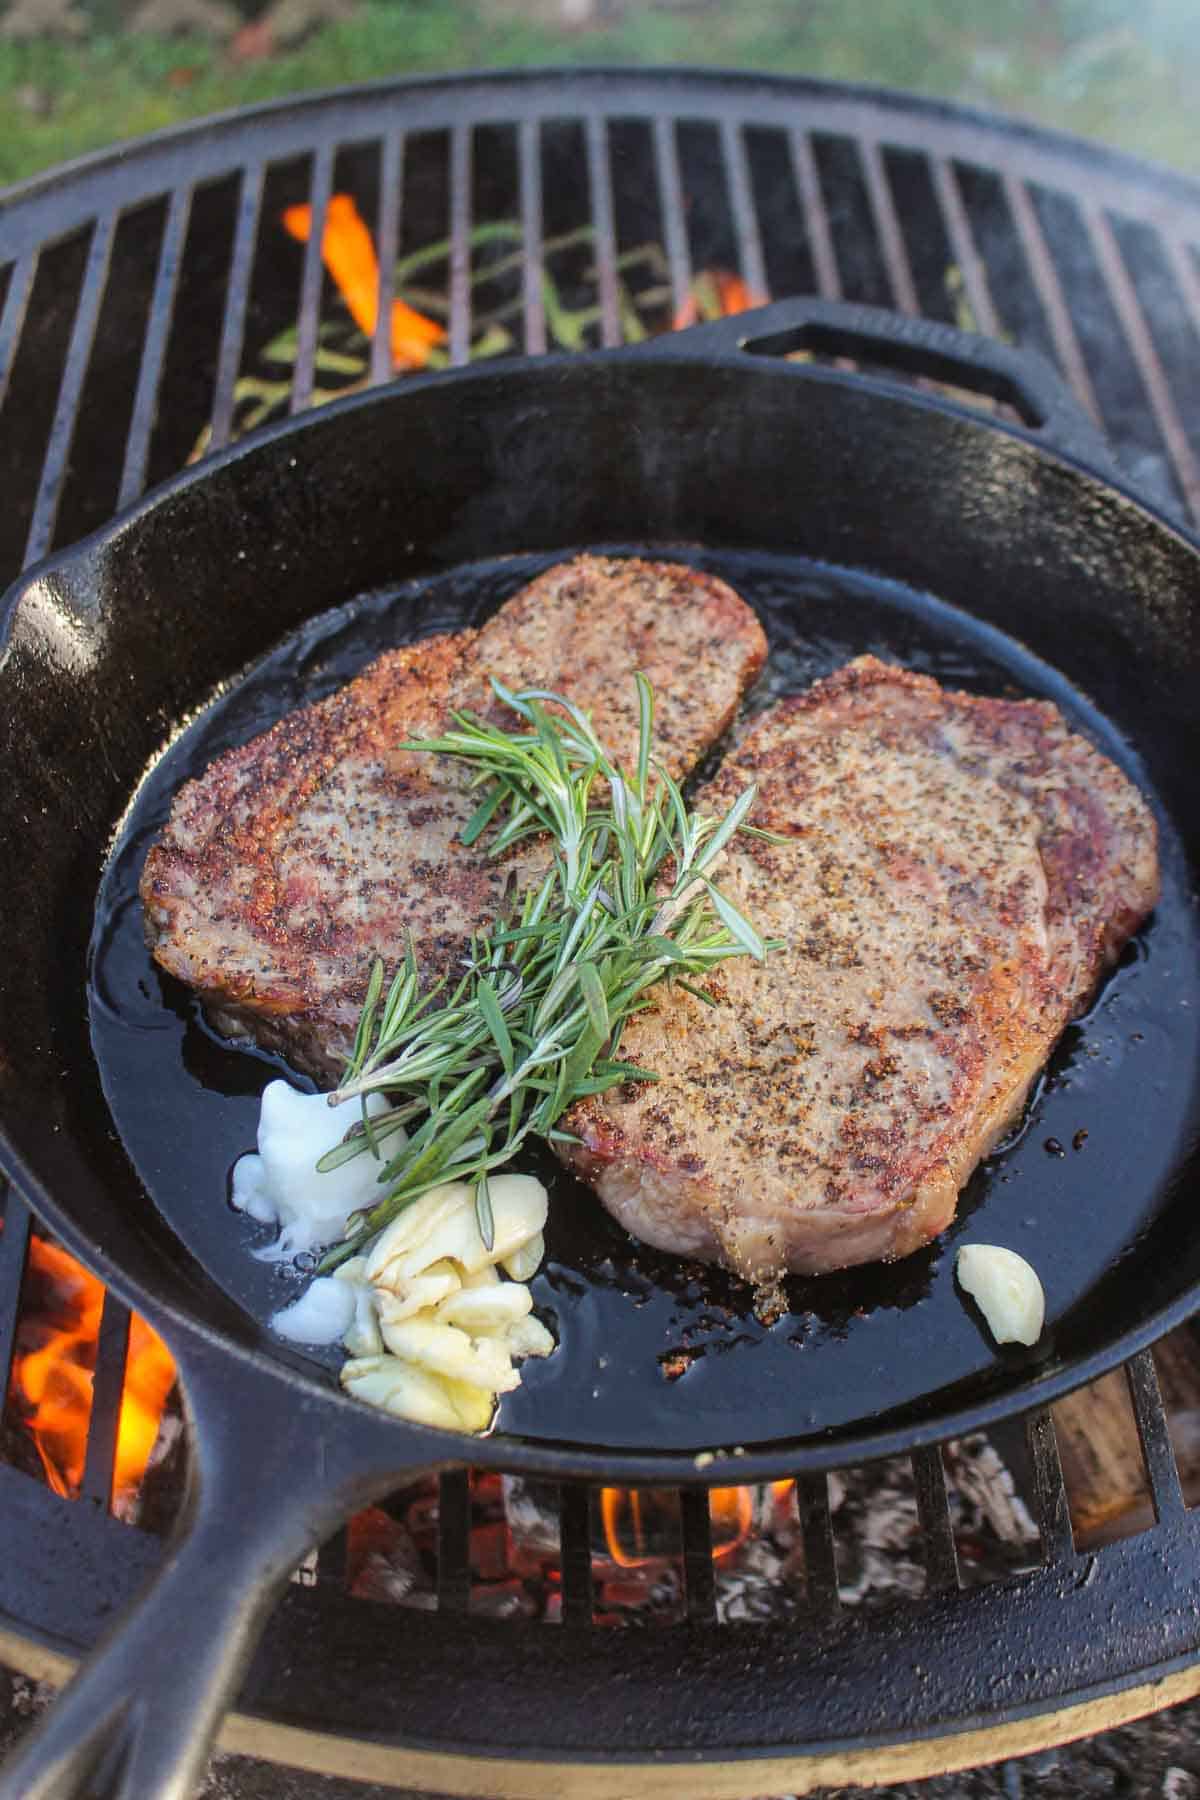 Cooking the steaks in a skillet with rosemary, garlic and beef tallow.